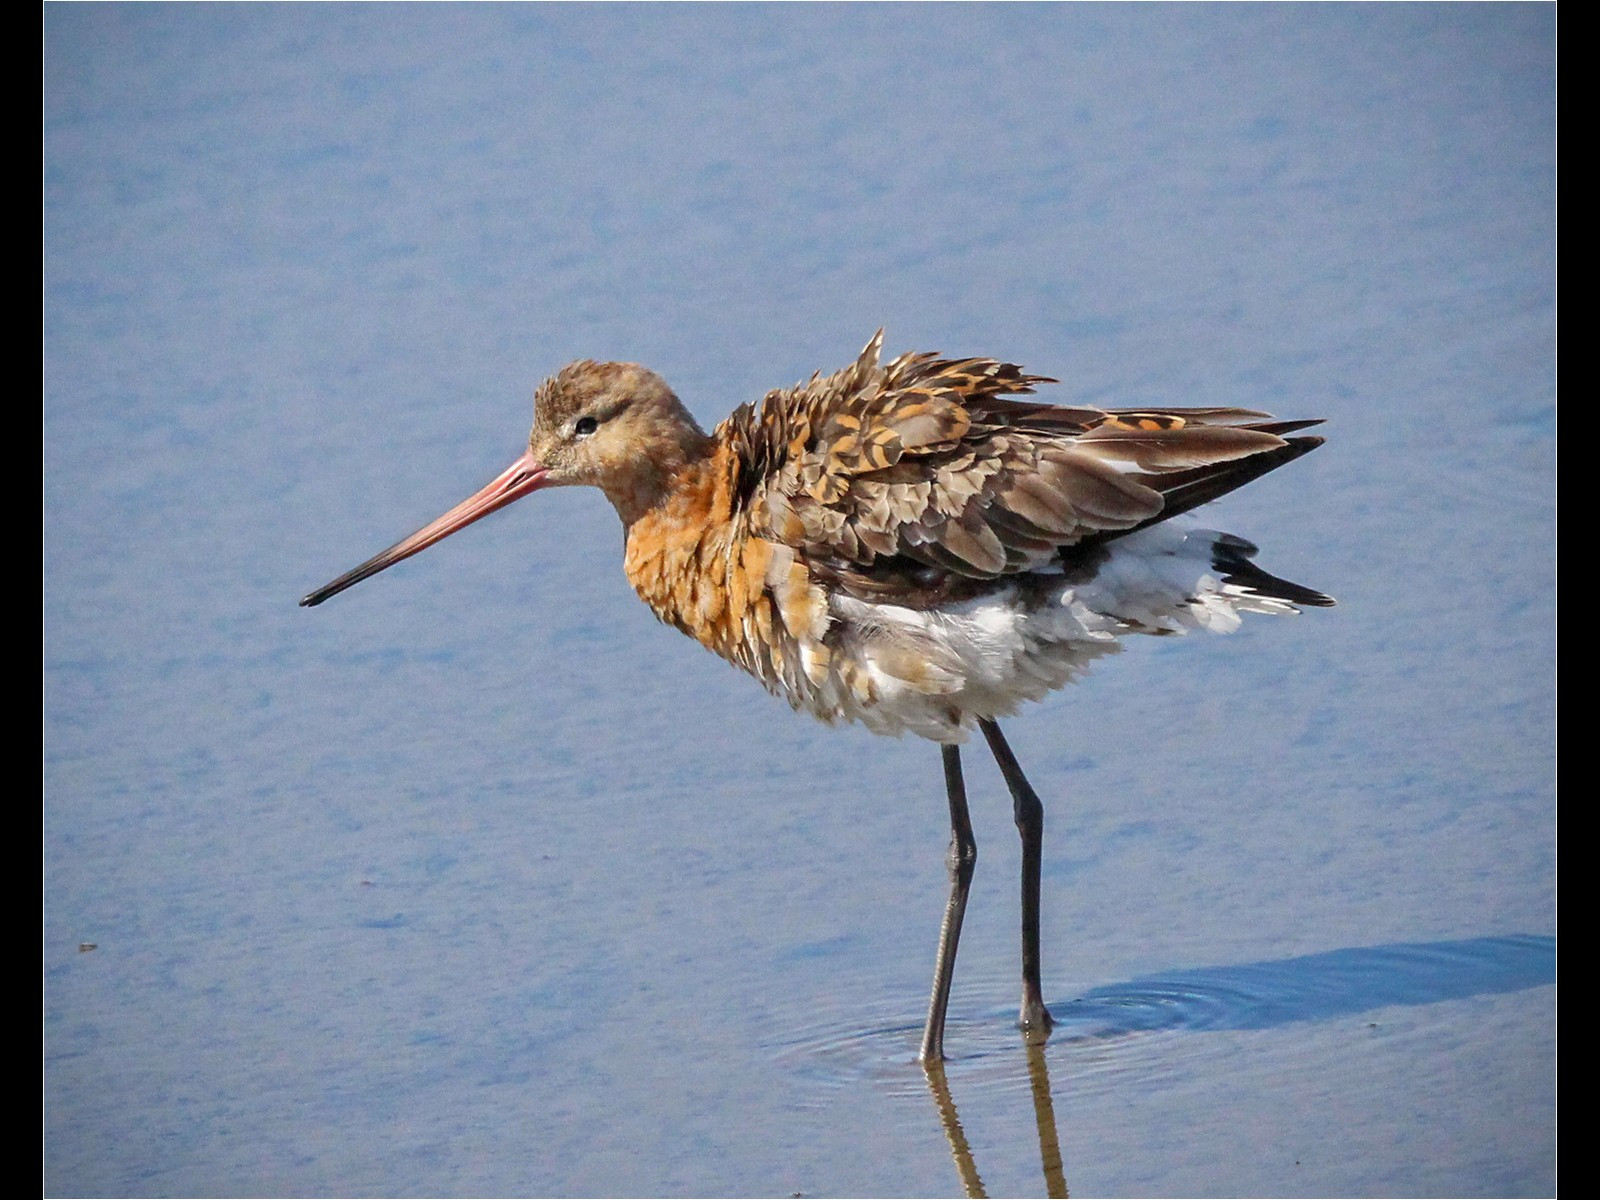 Black Tailed Godwit by Anne-Marie Imeson